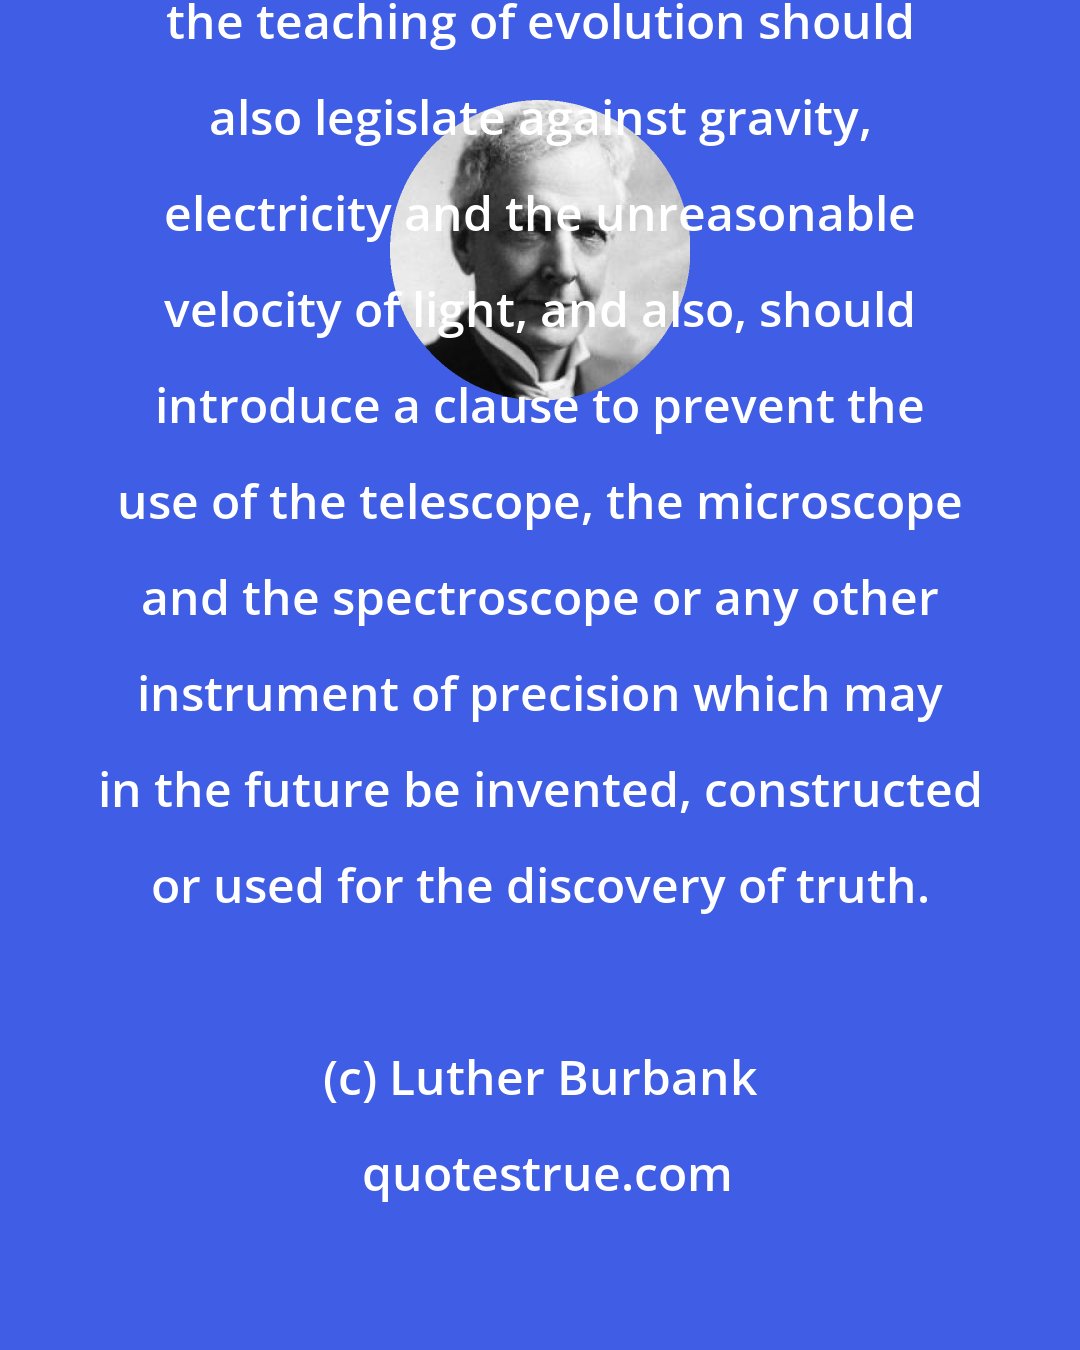 Luther Burbank: Those who would legislate against the teaching of evolution should also legislate against gravity, electricity and the unreasonable velocity of light, and also, should introduce a clause to prevent the use of the telescope, the microscope and the spectroscope or any other instrument of precision which may in the future be invented, constructed or used for the discovery of truth.